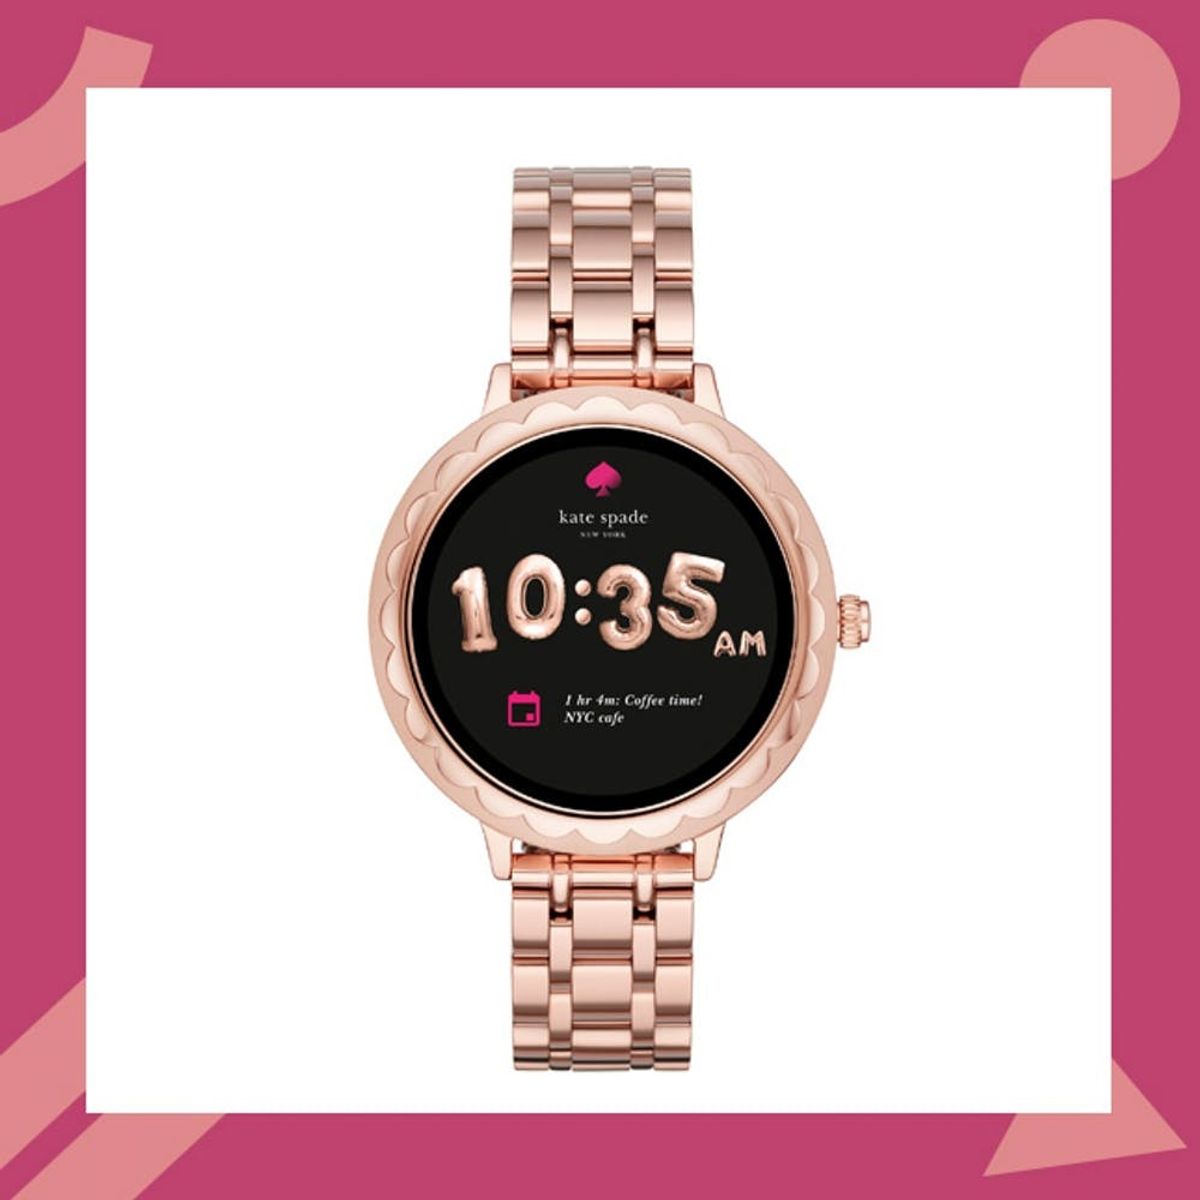 This Stylish Kate Spade Smartwatch Is Everything We Never Knew We Always Needed